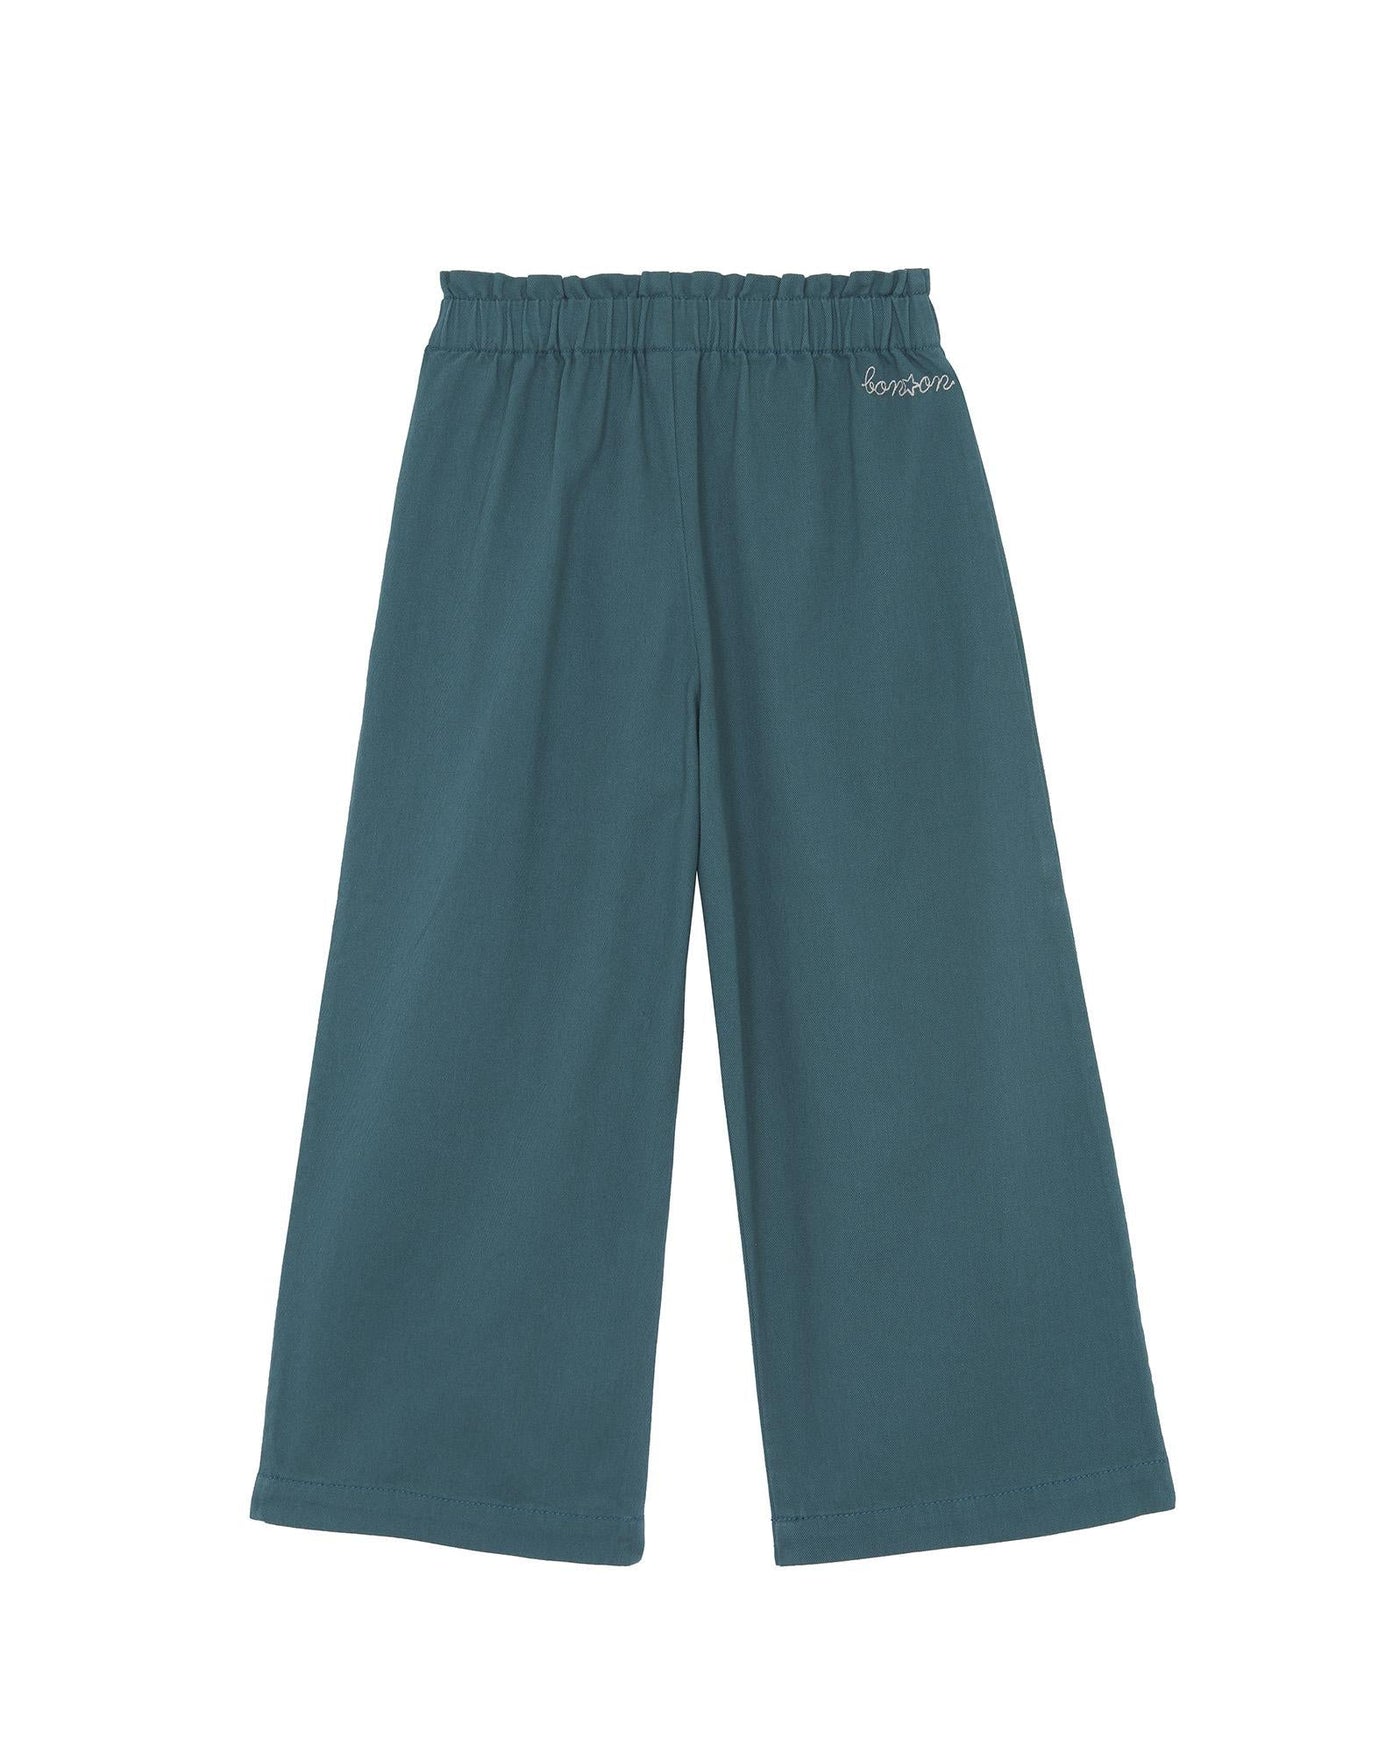 Eve Brushed Twill Pant in River Green